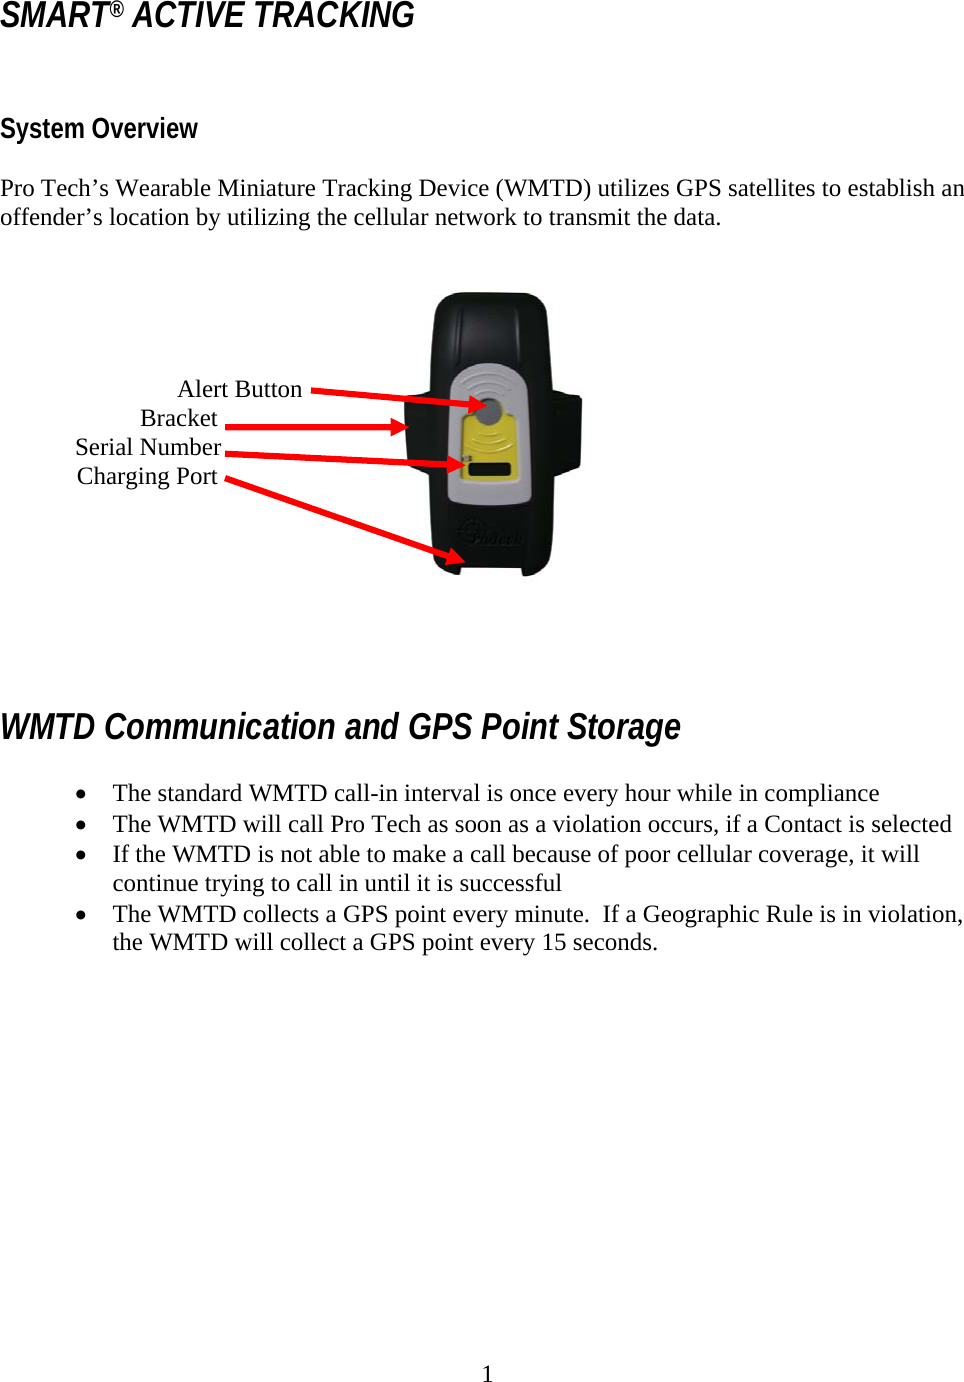 1  SMART® ACTIVE TRACKING   System Overview   Pro Tech’s Wearable Miniature Tracking Device (WMTD) utilizes GPS satellites to establish an offender’s location by utilizing the cellular network to transmit the data.                   Alert Button  Bracket             Serial Number          Charging Port      WMTD Communication and GPS Point Storage  • The standard WMTD call-in interval is once every hour while in compliance • The WMTD will call Pro Tech as soon as a violation occurs, if a Contact is selected • If the WMTD is not able to make a call because of poor cellular coverage, it will continue trying to call in until it is successful • The WMTD collects a GPS point every minute.  If a Geographic Rule is in violation, the WMTD will collect a GPS point every 15 seconds.            